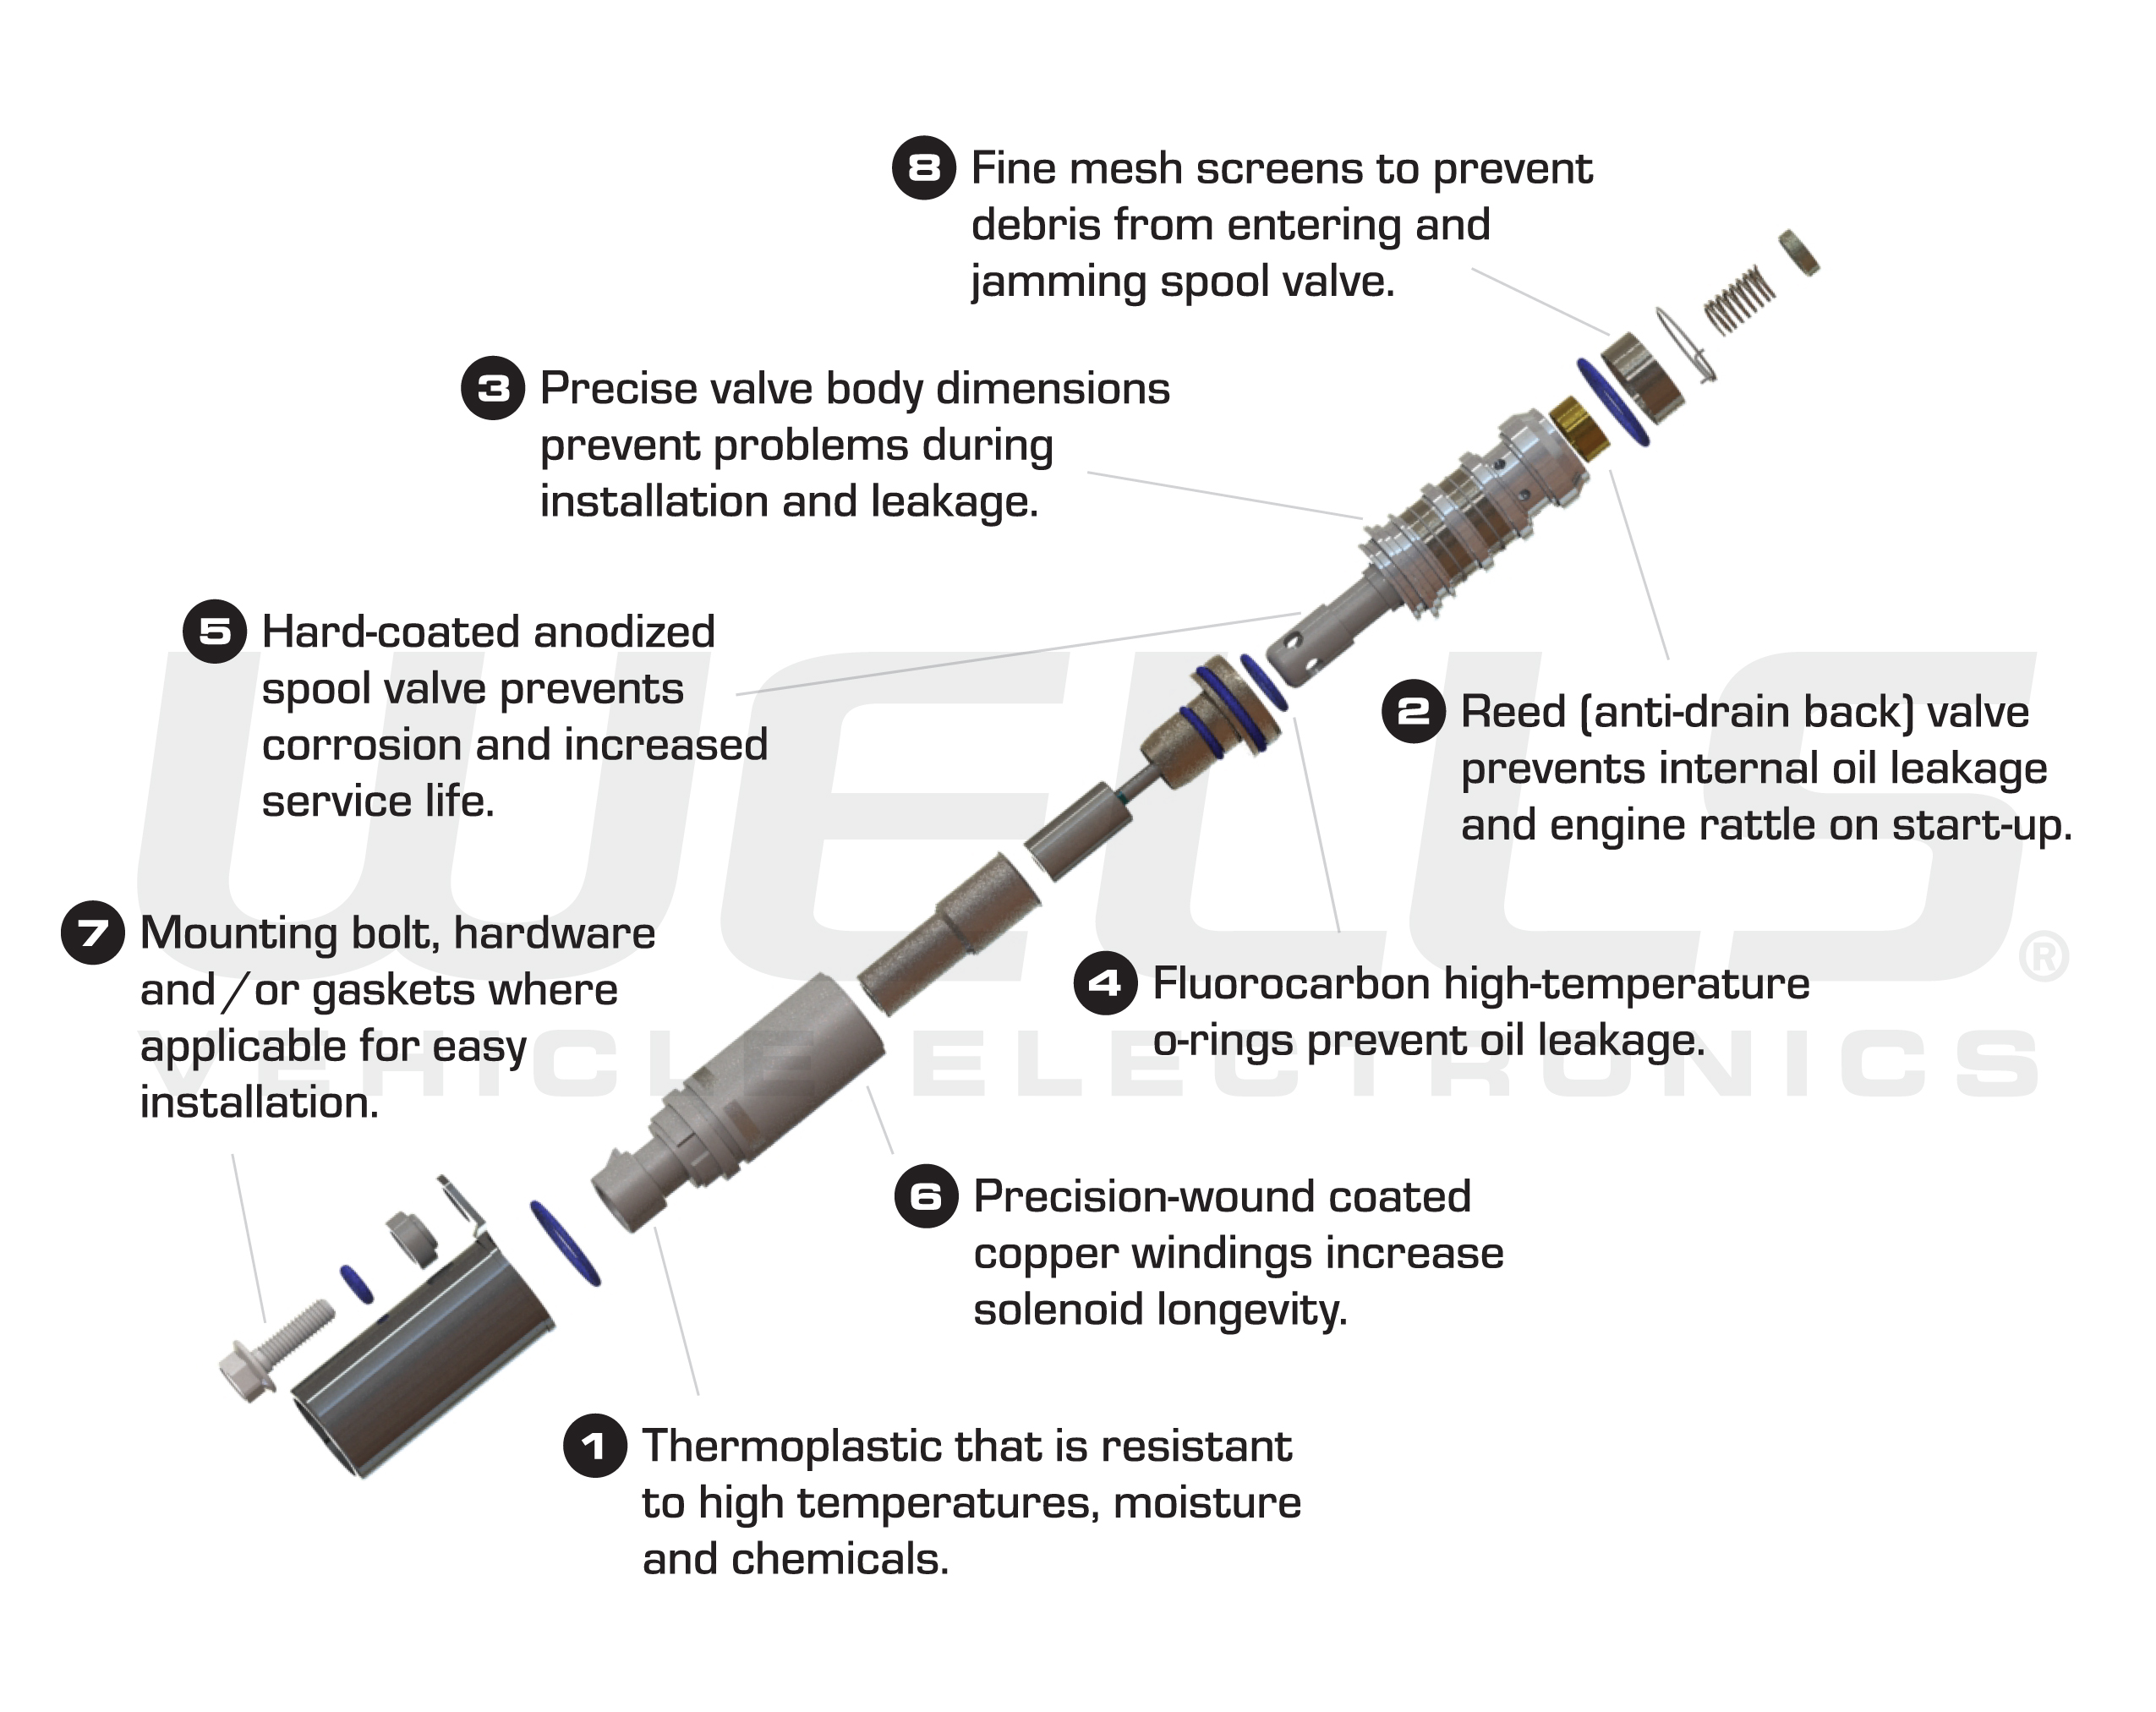 Expanded image of VVT Solenoid with feature text